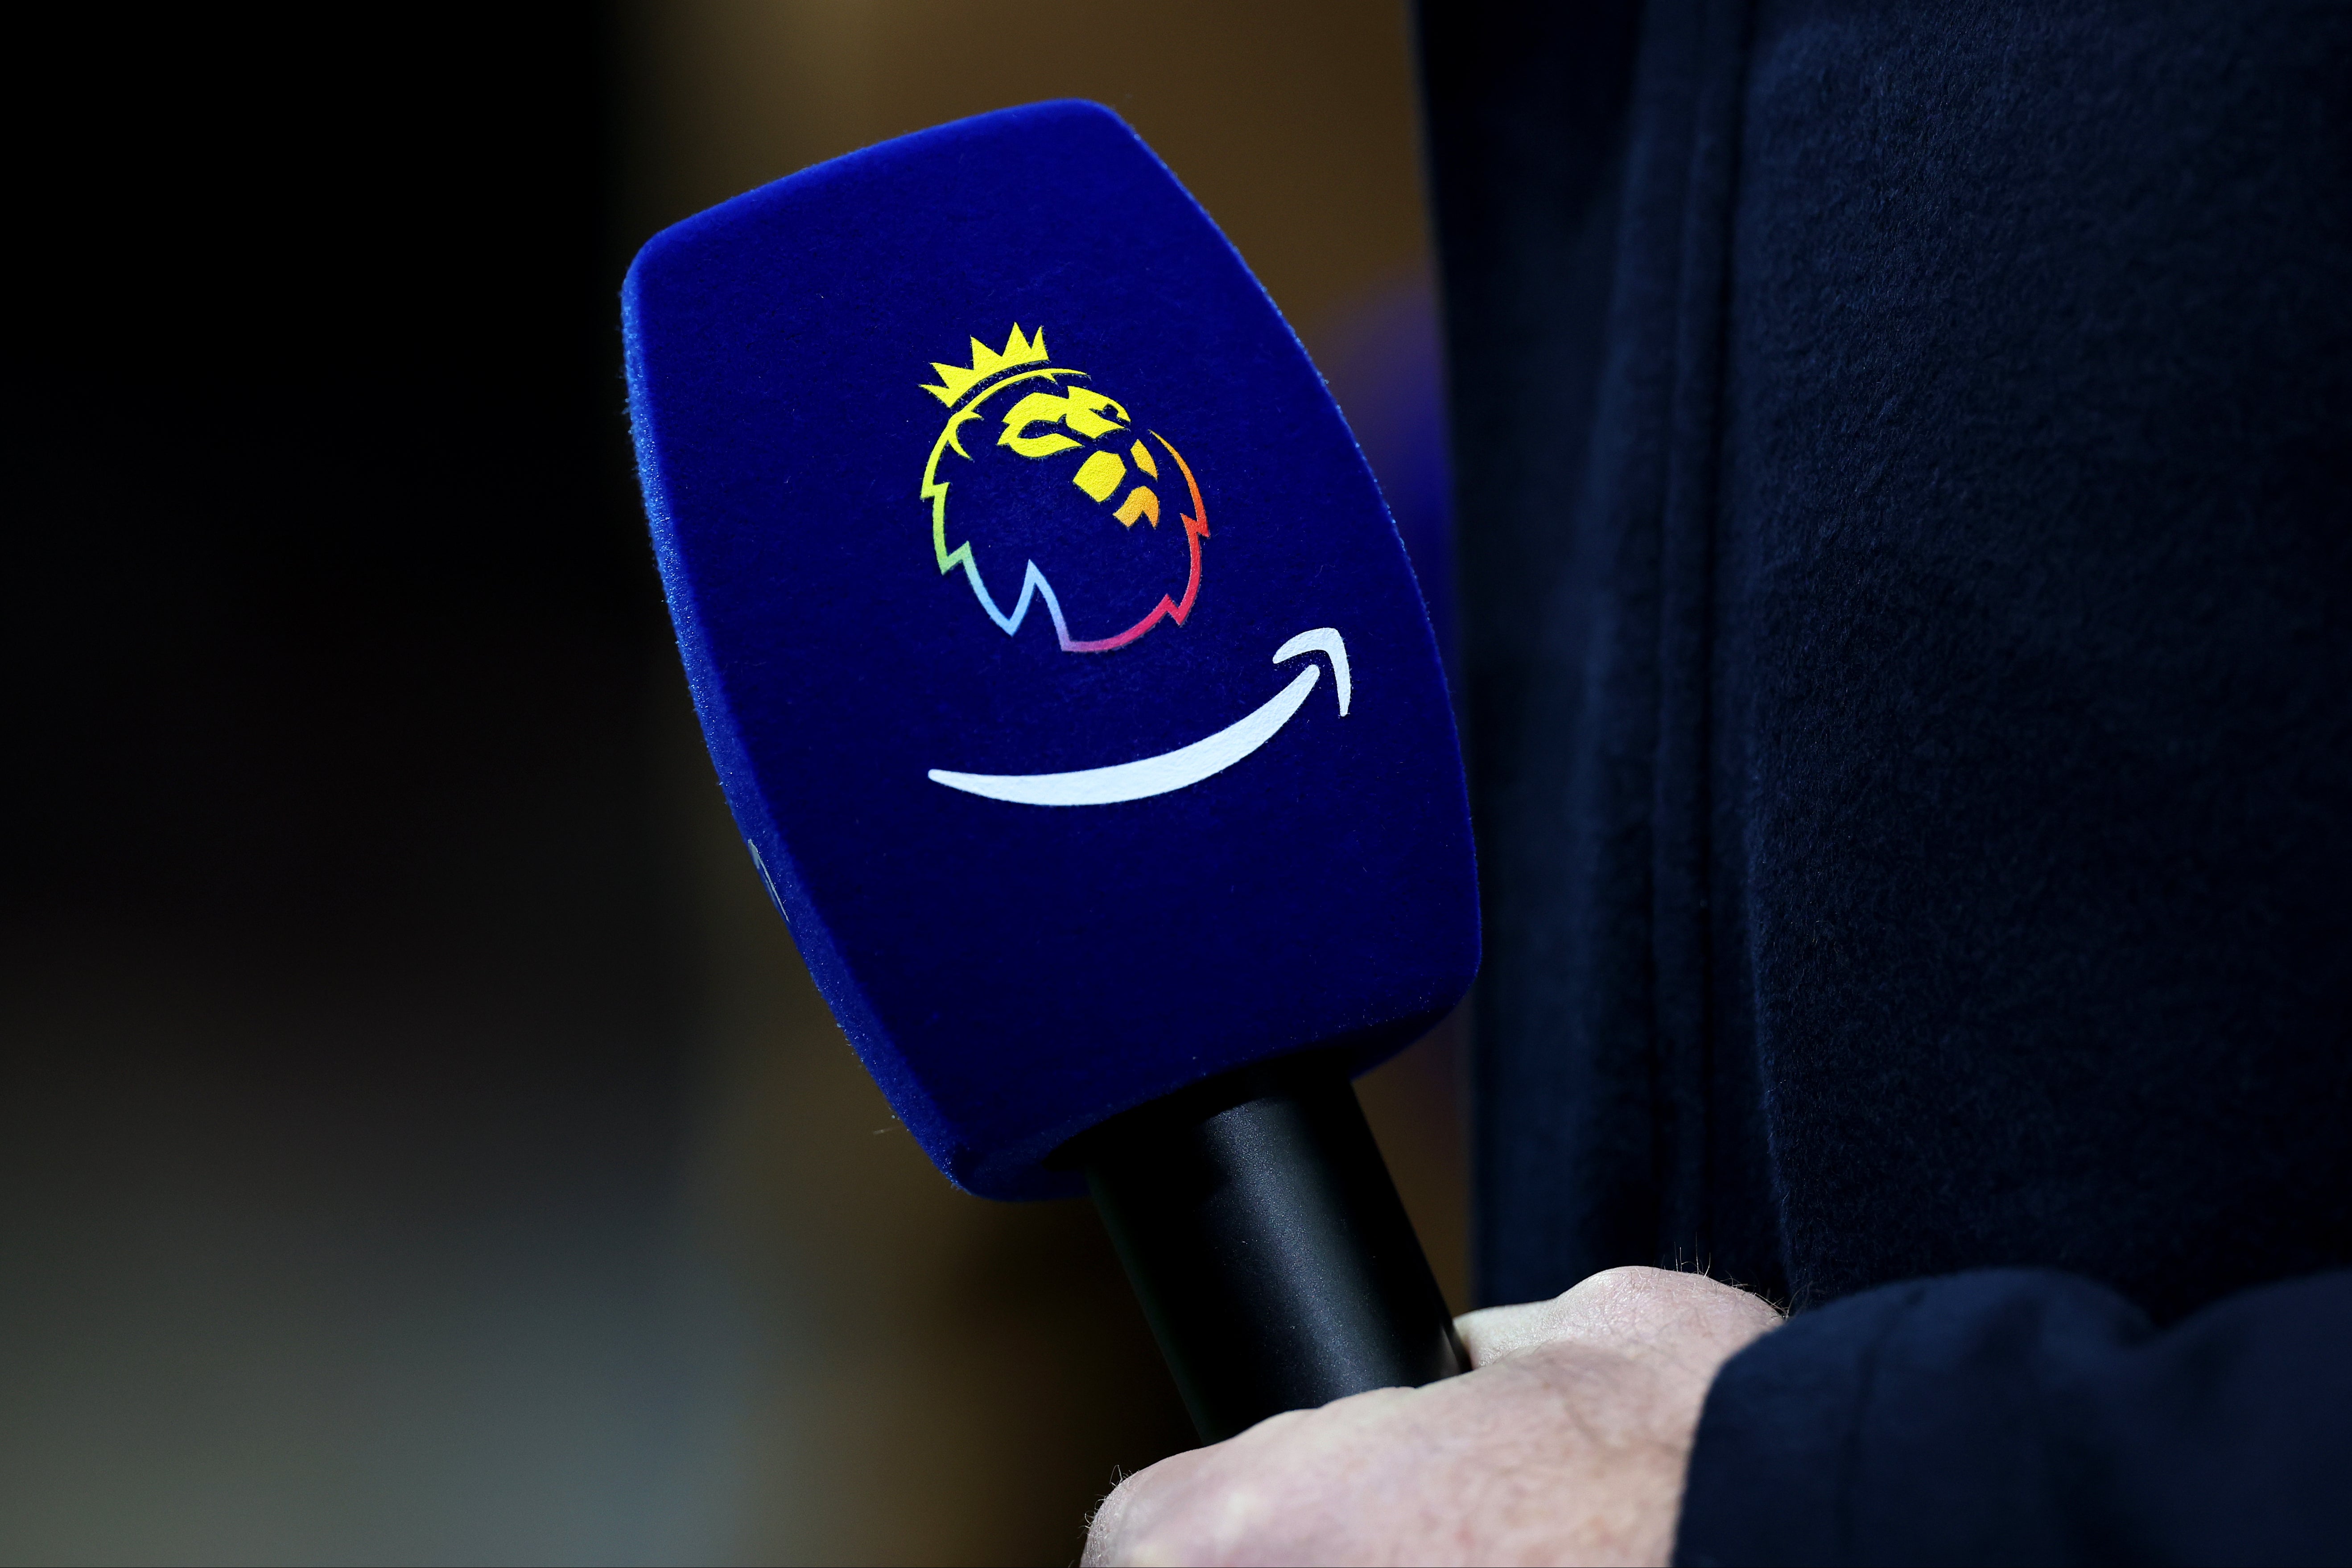 Amazon Prime is one of the Premier League’s broadcast partners